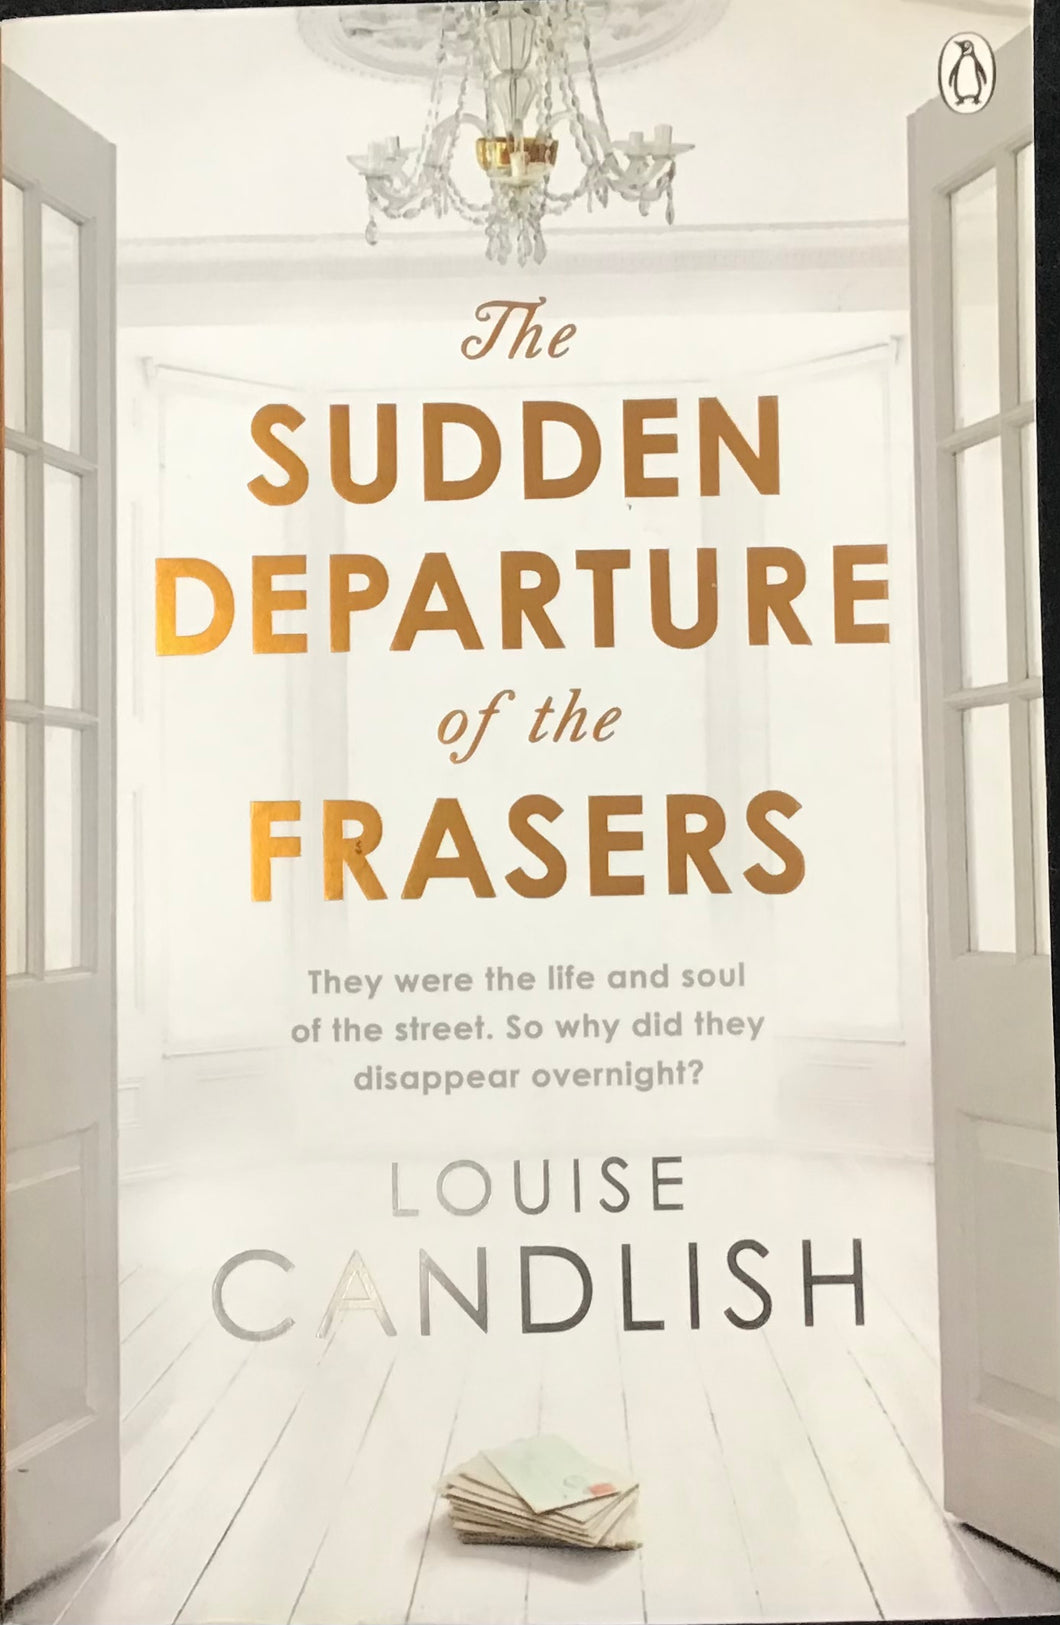 The Sudden Departure of the Frasers- Louise Candlish